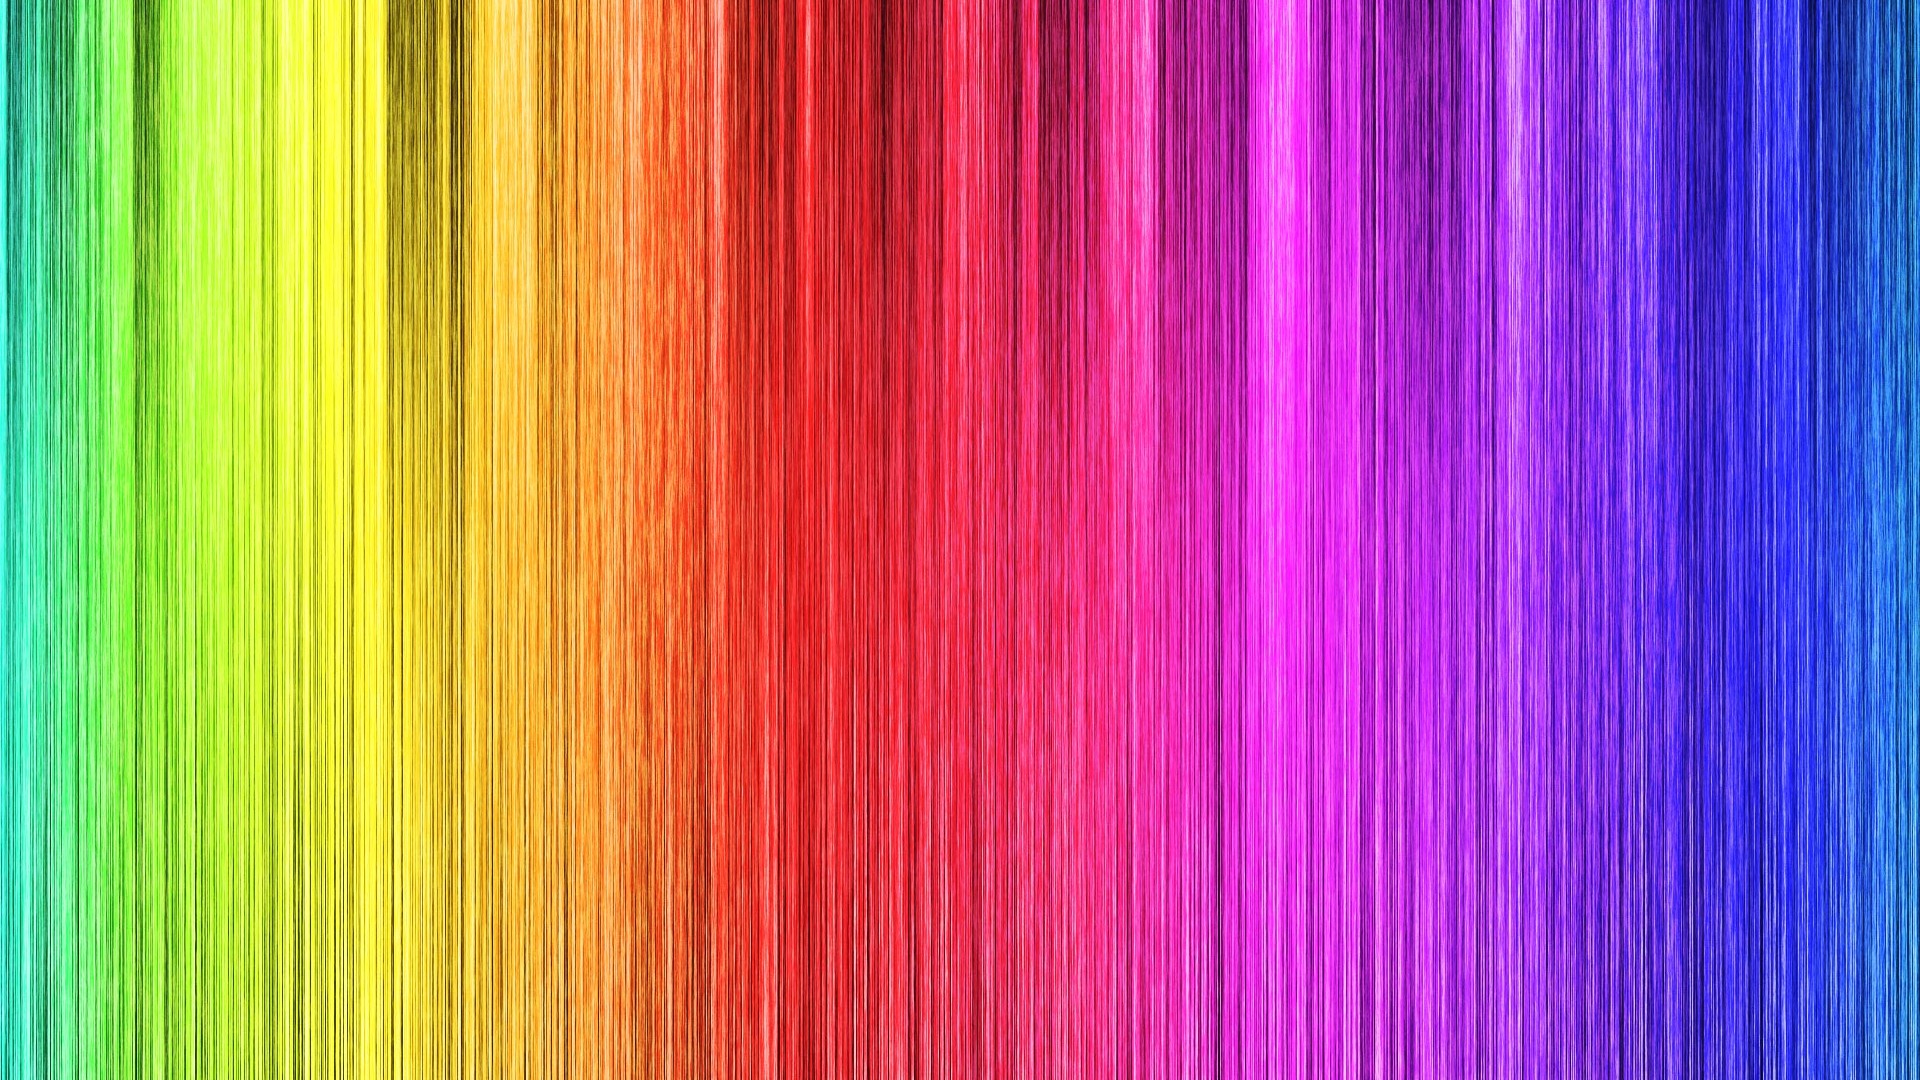 Computer Wallpapers Rainbow with image resolution 1920x1080 pixel. You can use this wallpaper as background for your desktop Computer Screensavers, Android or iPhone smartphones